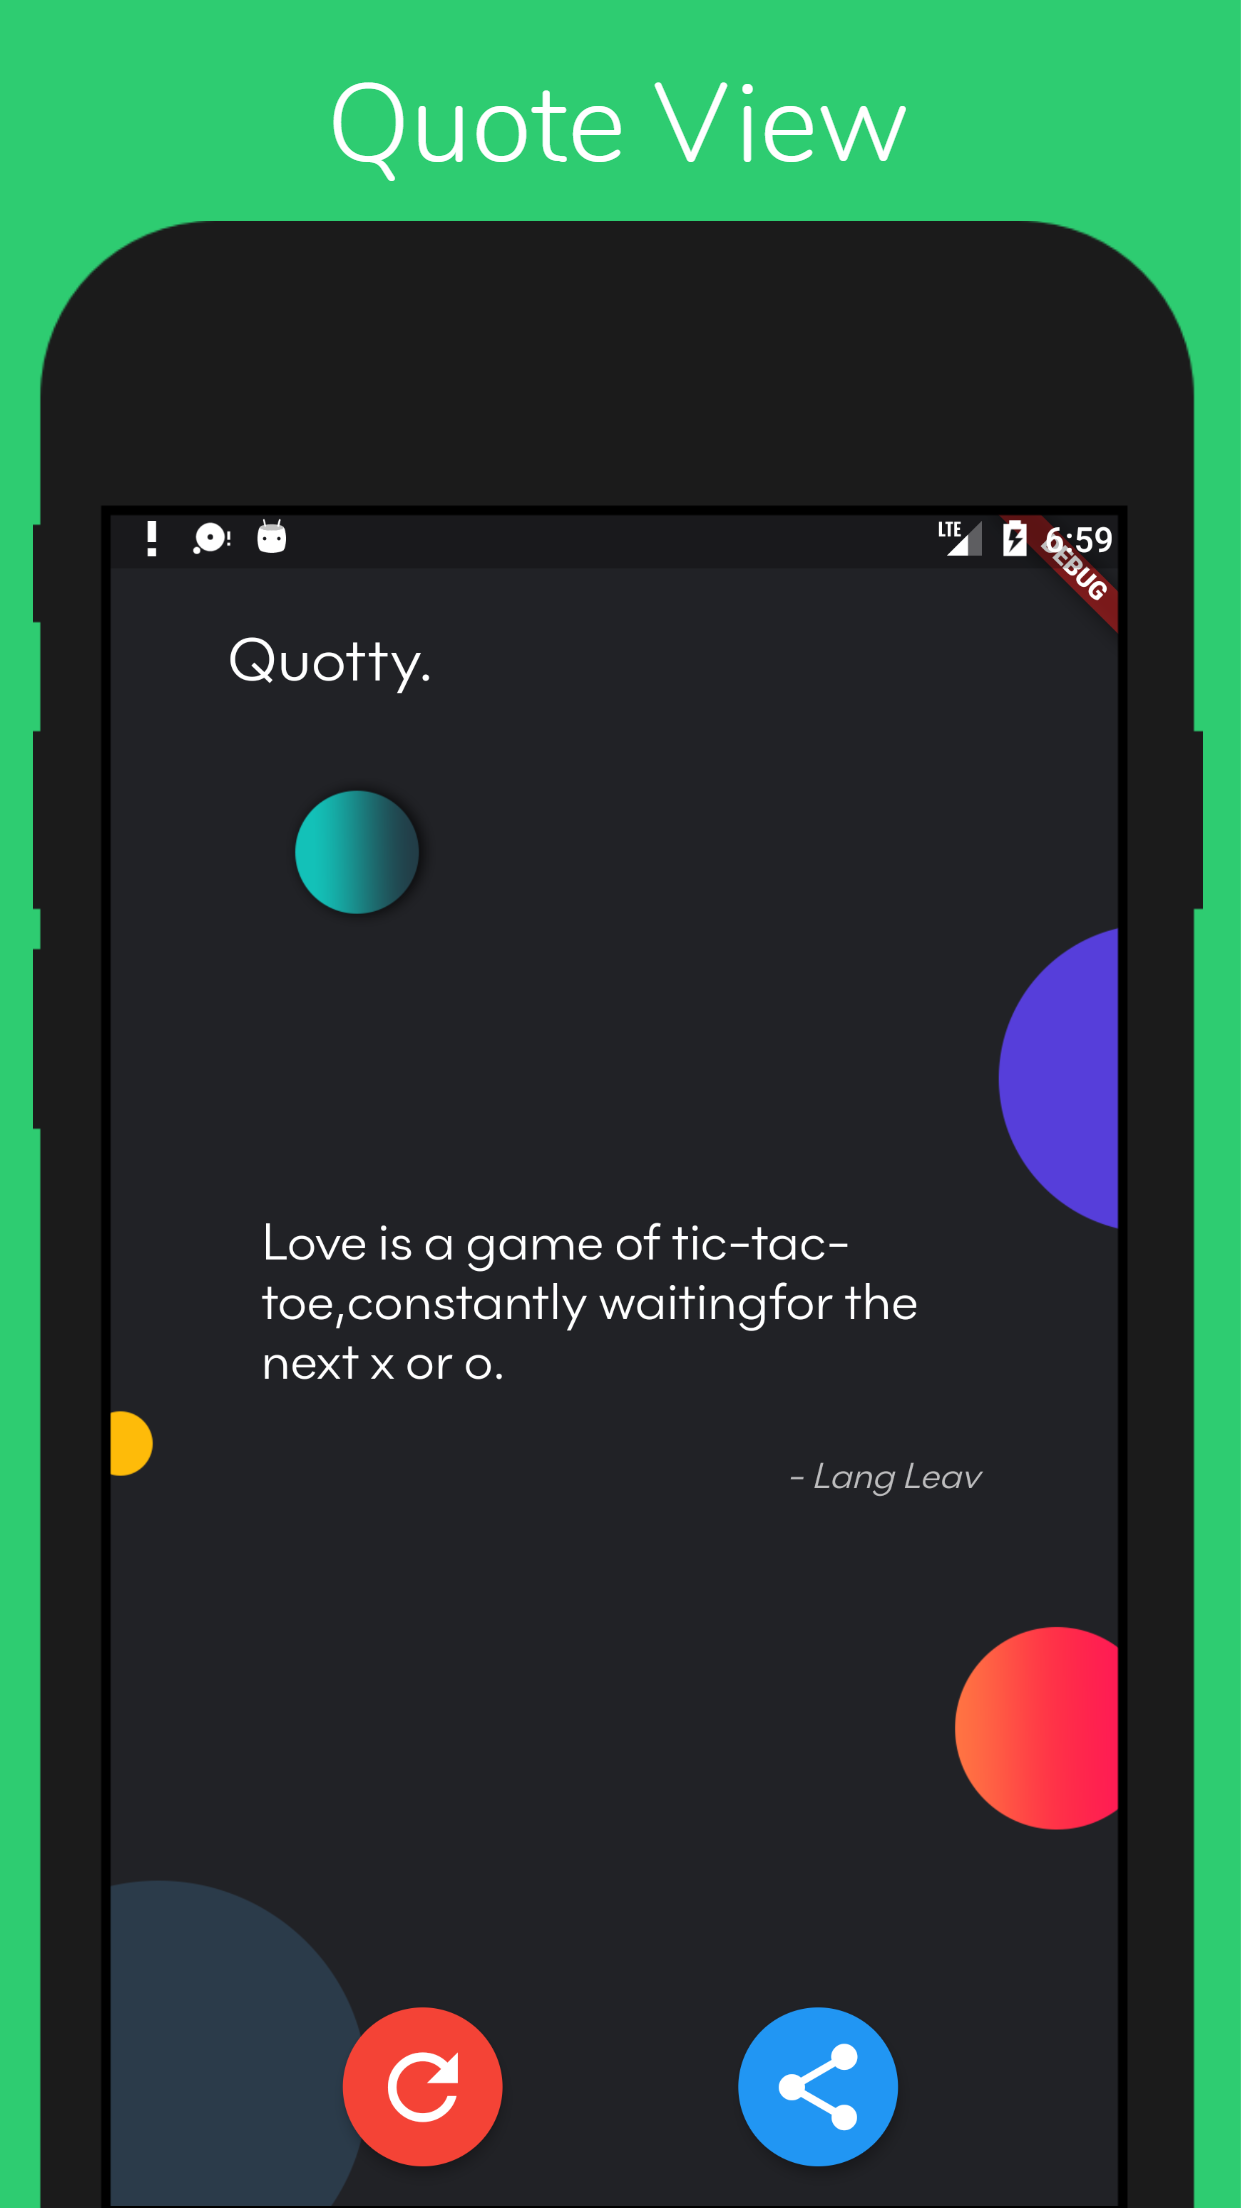 Quotty - Flutter Full Quote App Free Download | Download Quotty